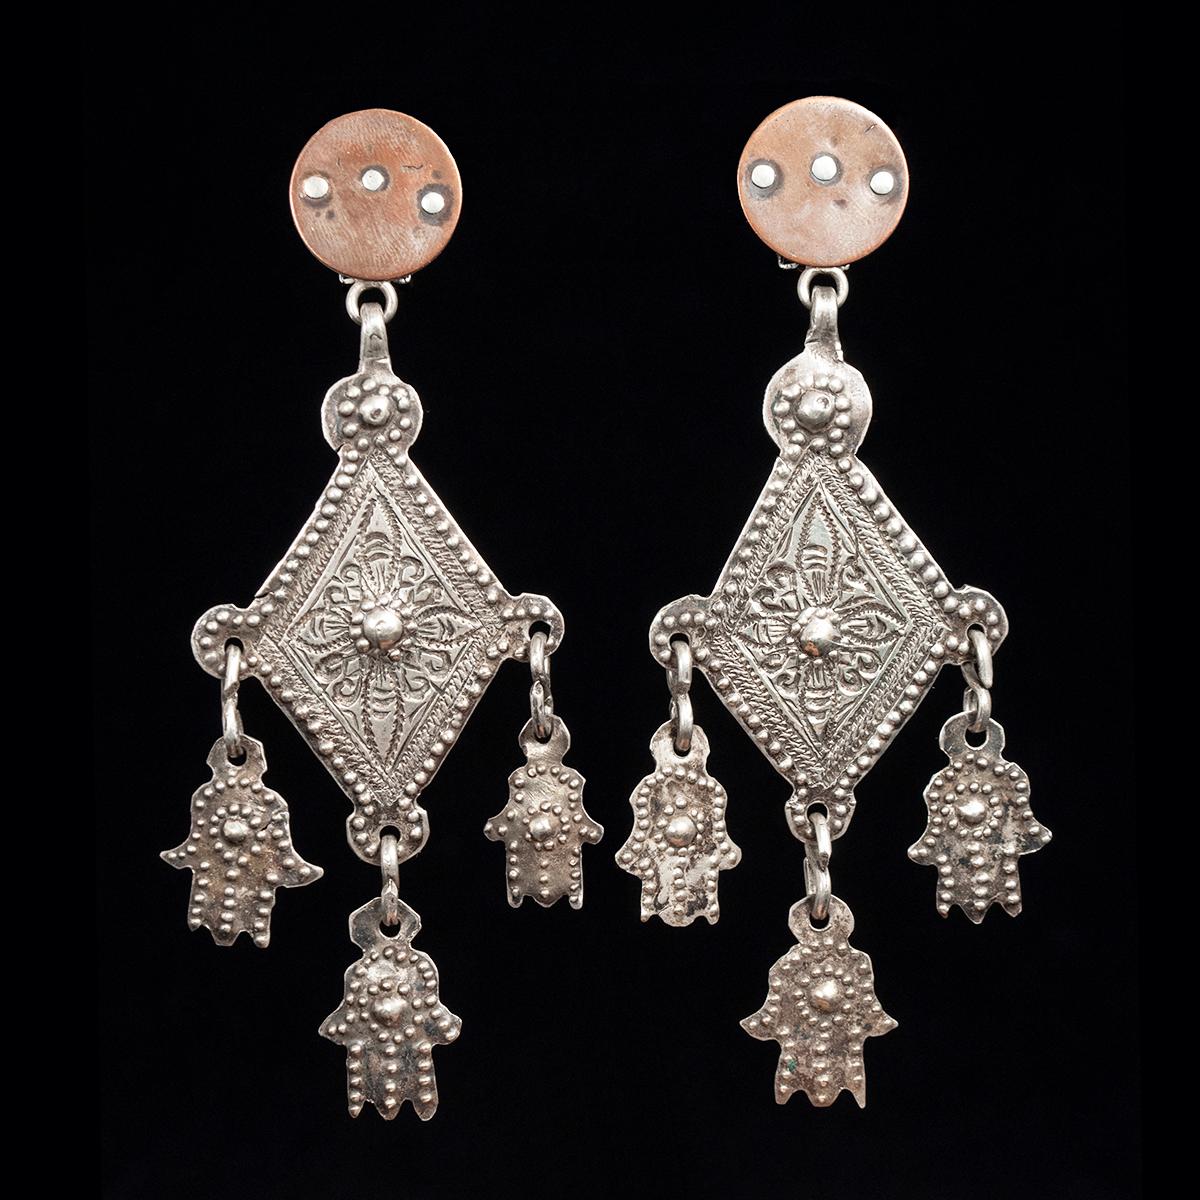 Mid-20th Century Silver Khamsa and Copper Earrings by Jewels of Santa Fe/Marrakesh

A pair of earrings made by Jewels with rural Moroccan village pendants with three small khamsas, hung from her signature hand made disks, these in copper.
They are